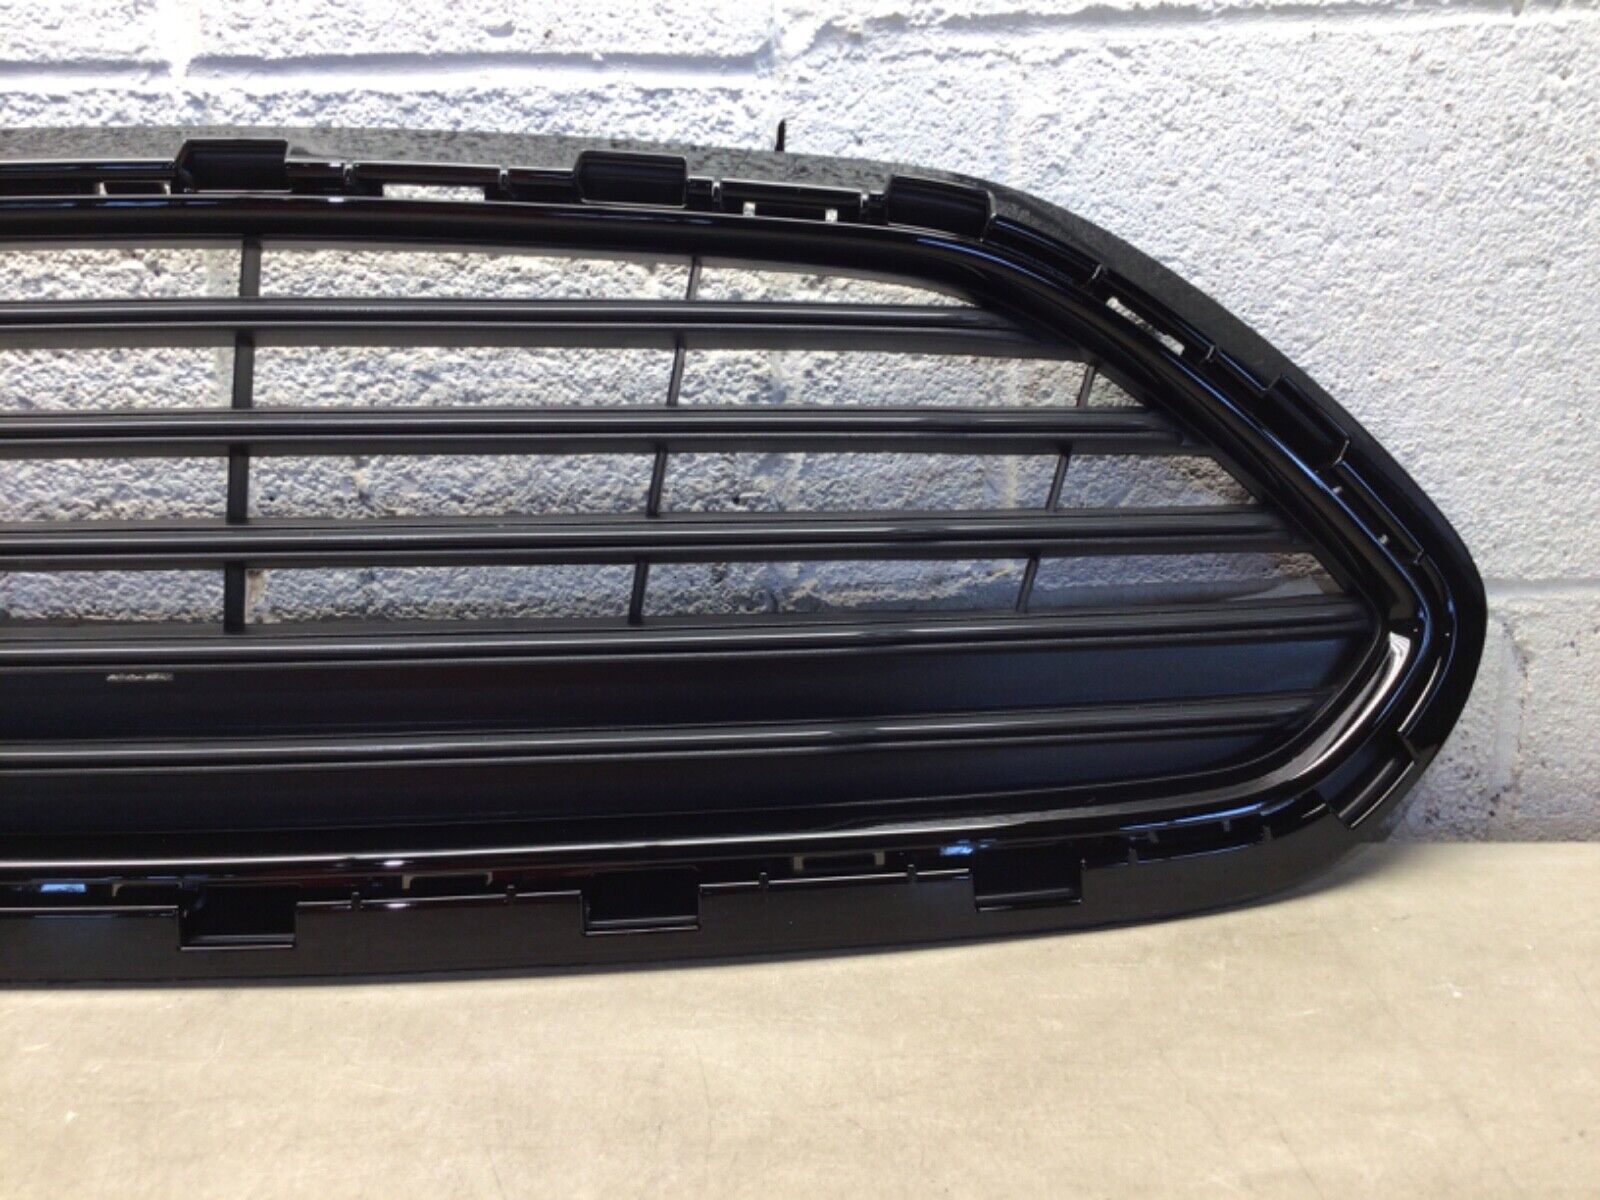 2014-2019 Ford Fiesta Front GRILLE NEW OPEN BOX OEM G2BB 17B968 AA5UAW ✅✅